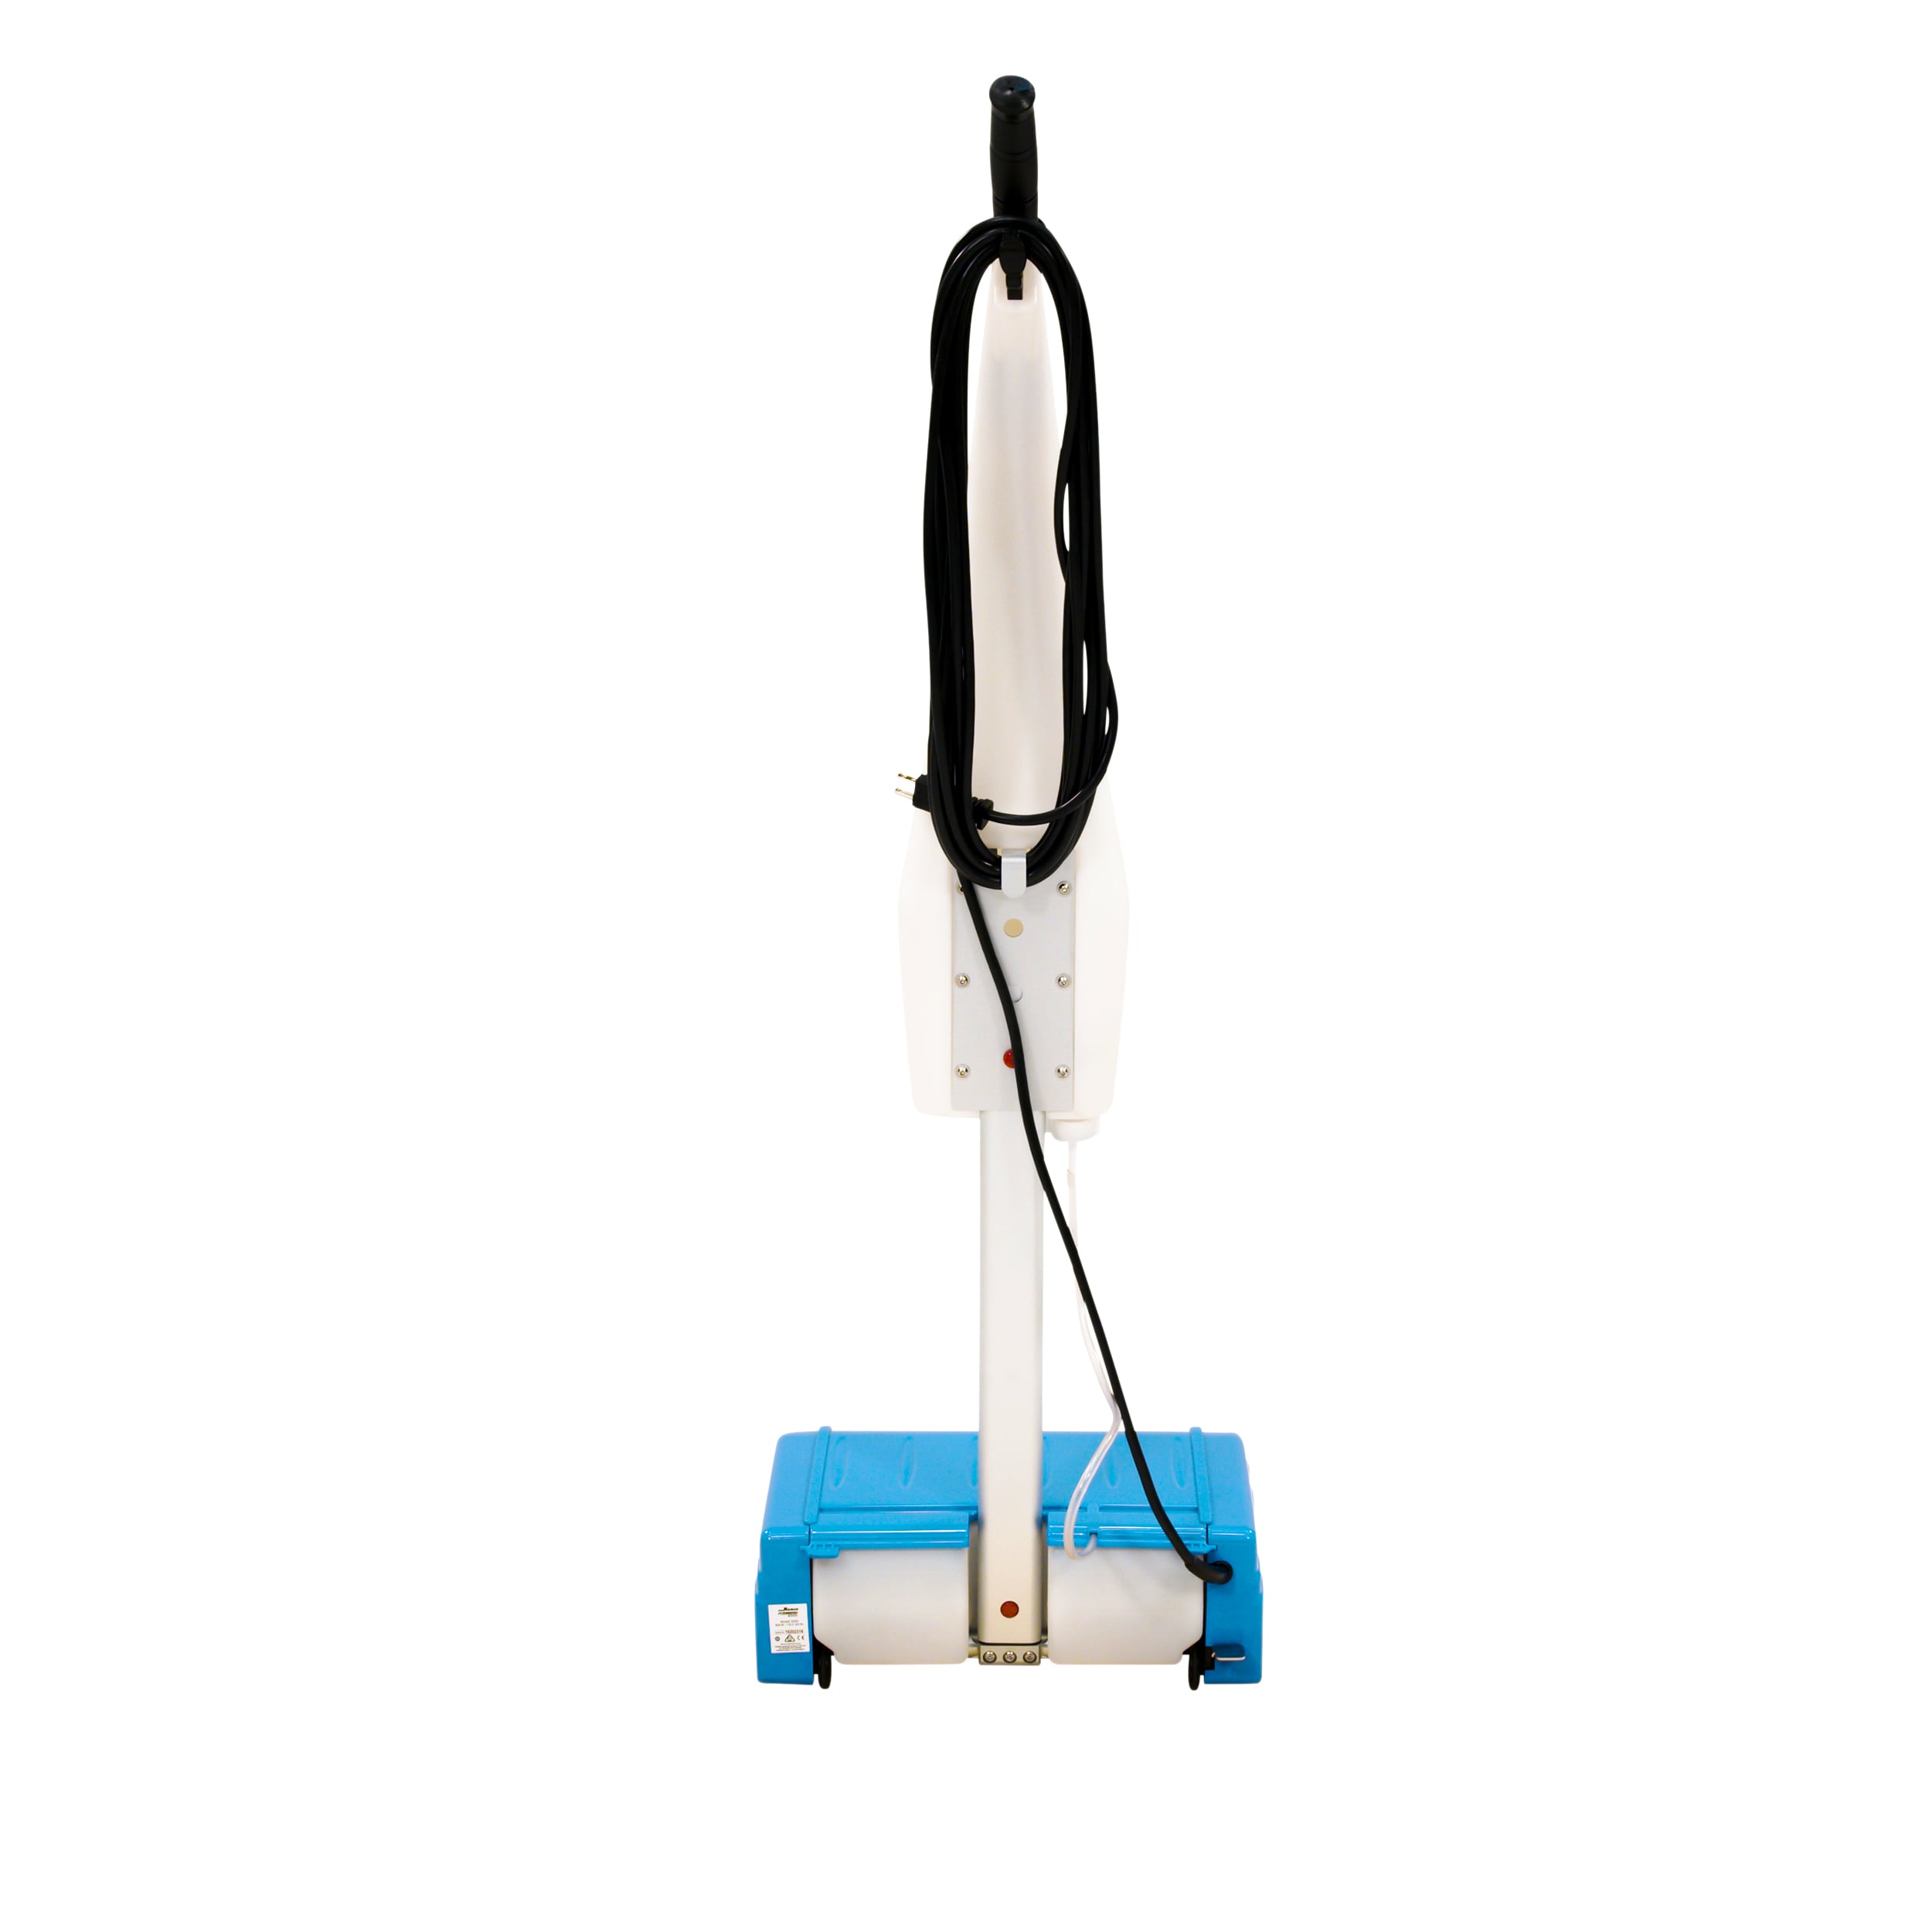 Selecting Floor Scrubbers for School Districts